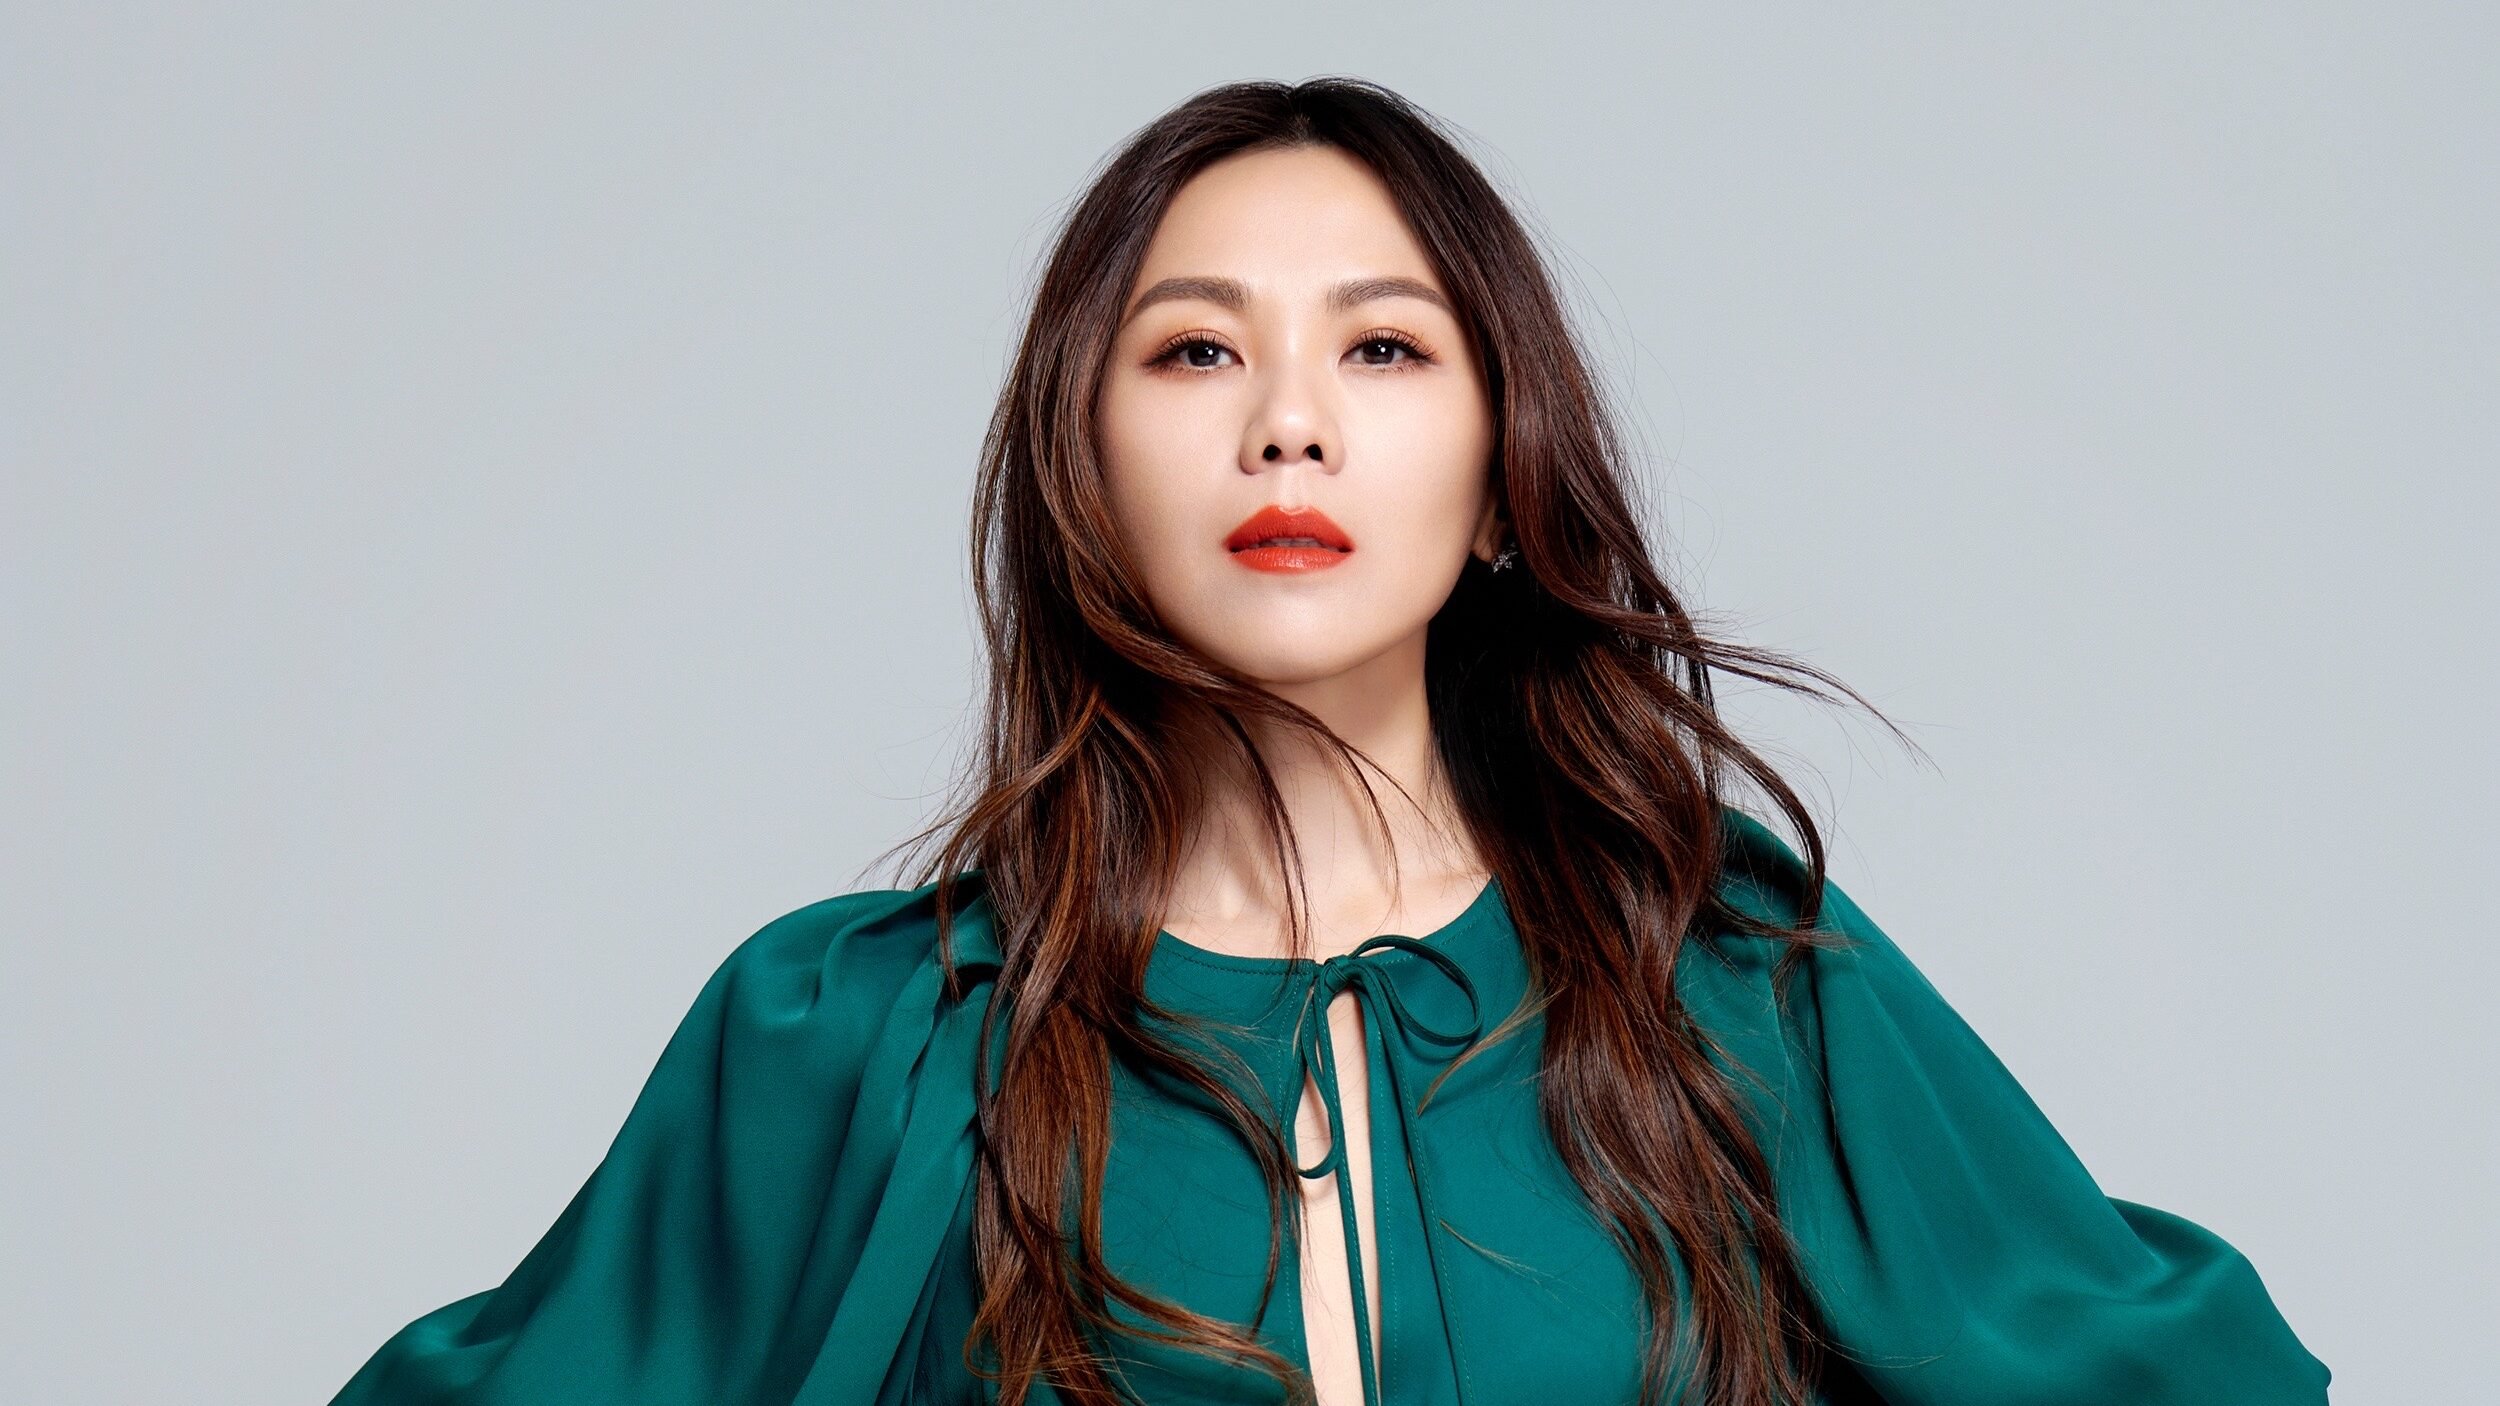 $100m-backed Asia-focused fund blackx strikes global music rights partnership with superstar Tanya Chua – Music Business Worldwide